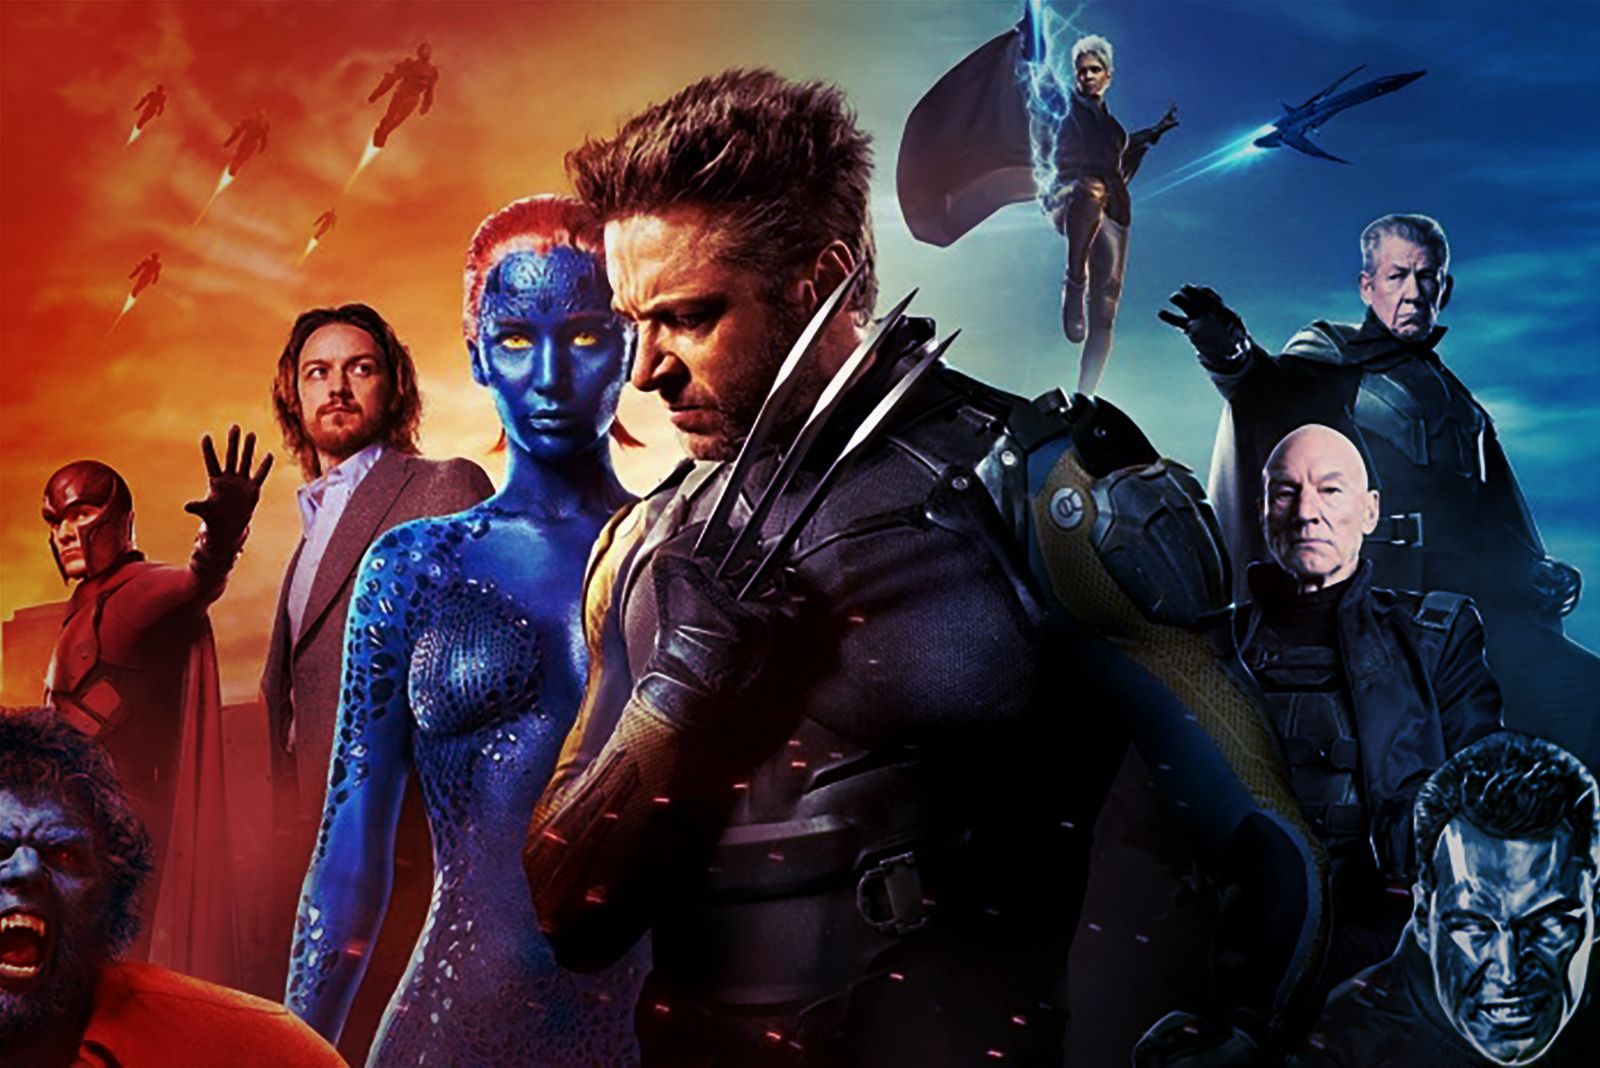 All X-Men Movies in Chronological Order